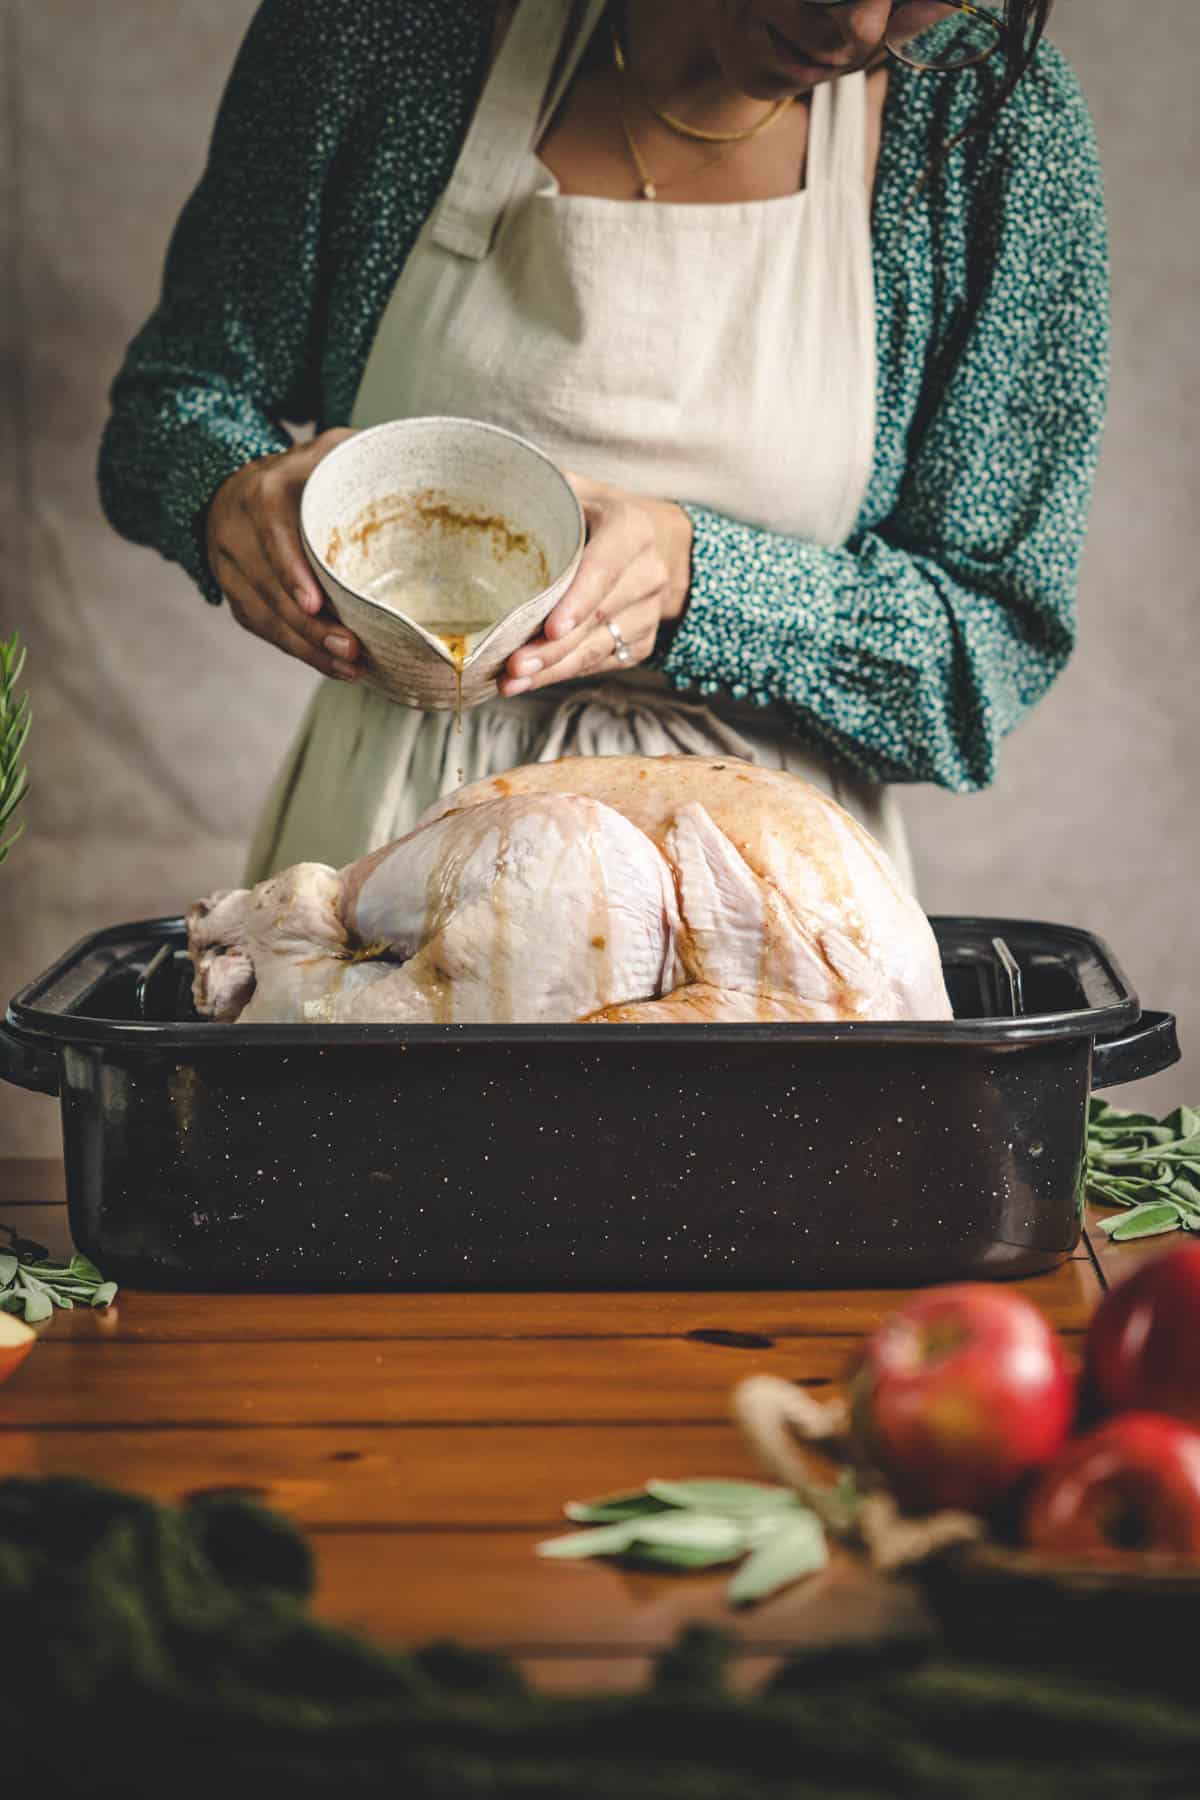 Woman in a green floral top and beige apron, pouring apple honey glaze onto a raw turkey.